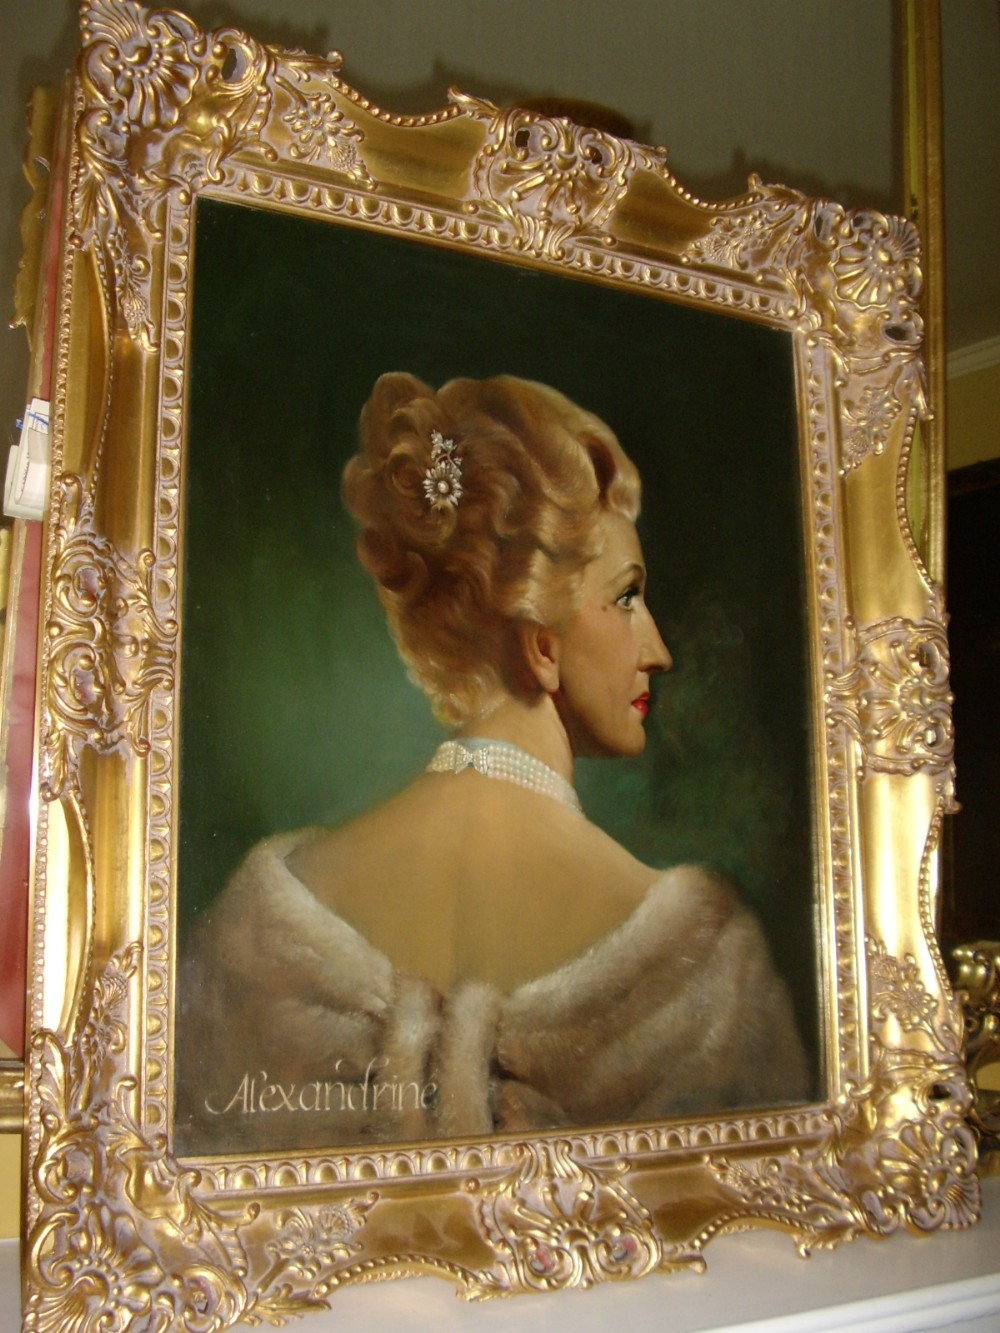 oil portrait of a lady titled alexandrine by victoria swain frame 27 x 31 inches